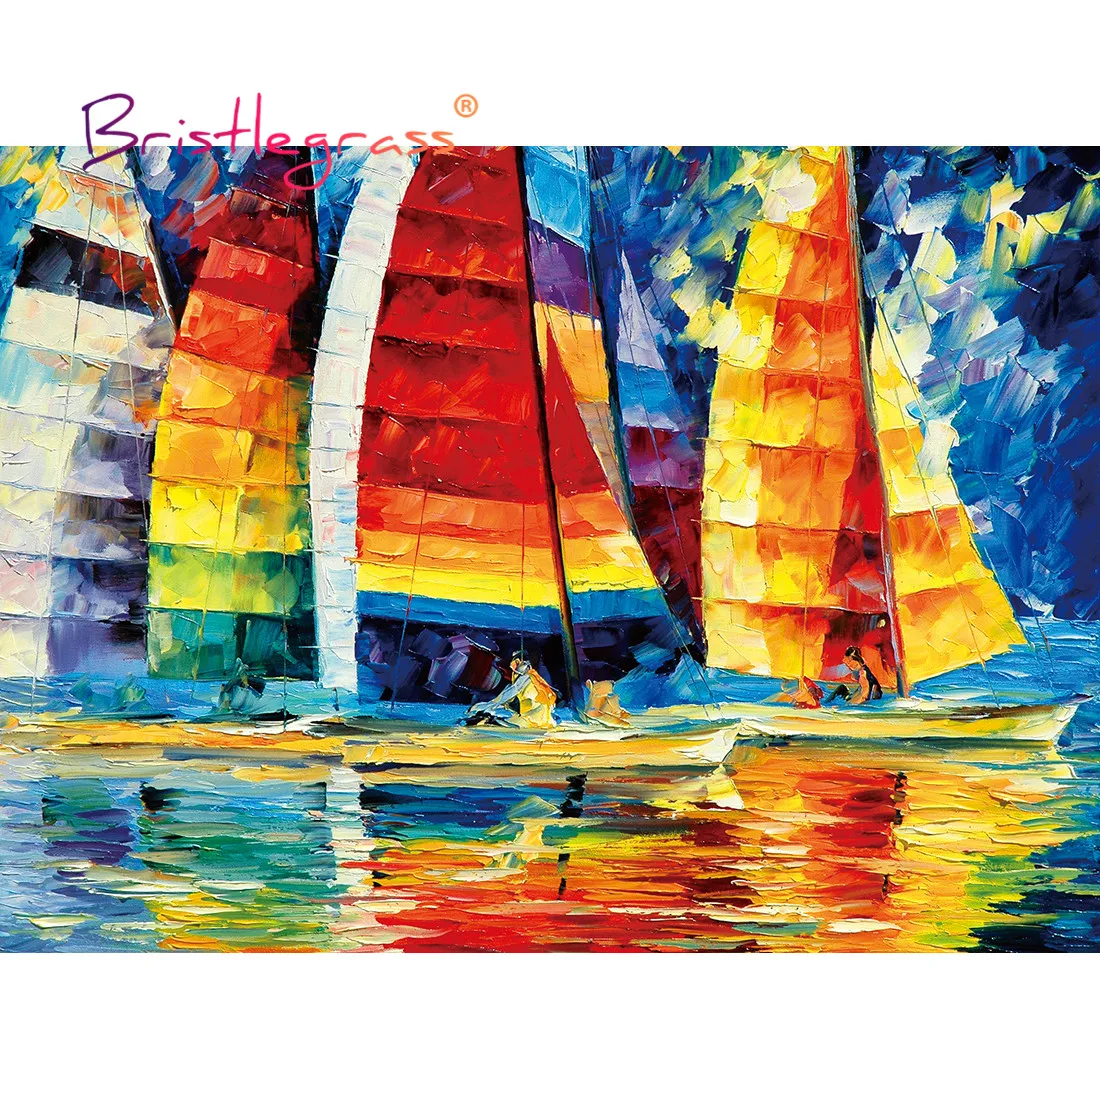 BRISTLEGRASS Wooden Jigsaw Puzzles 500 1000 Pieces Sailboat Educational Toy Collectibles Decorative Wall Painting Art Home Decor